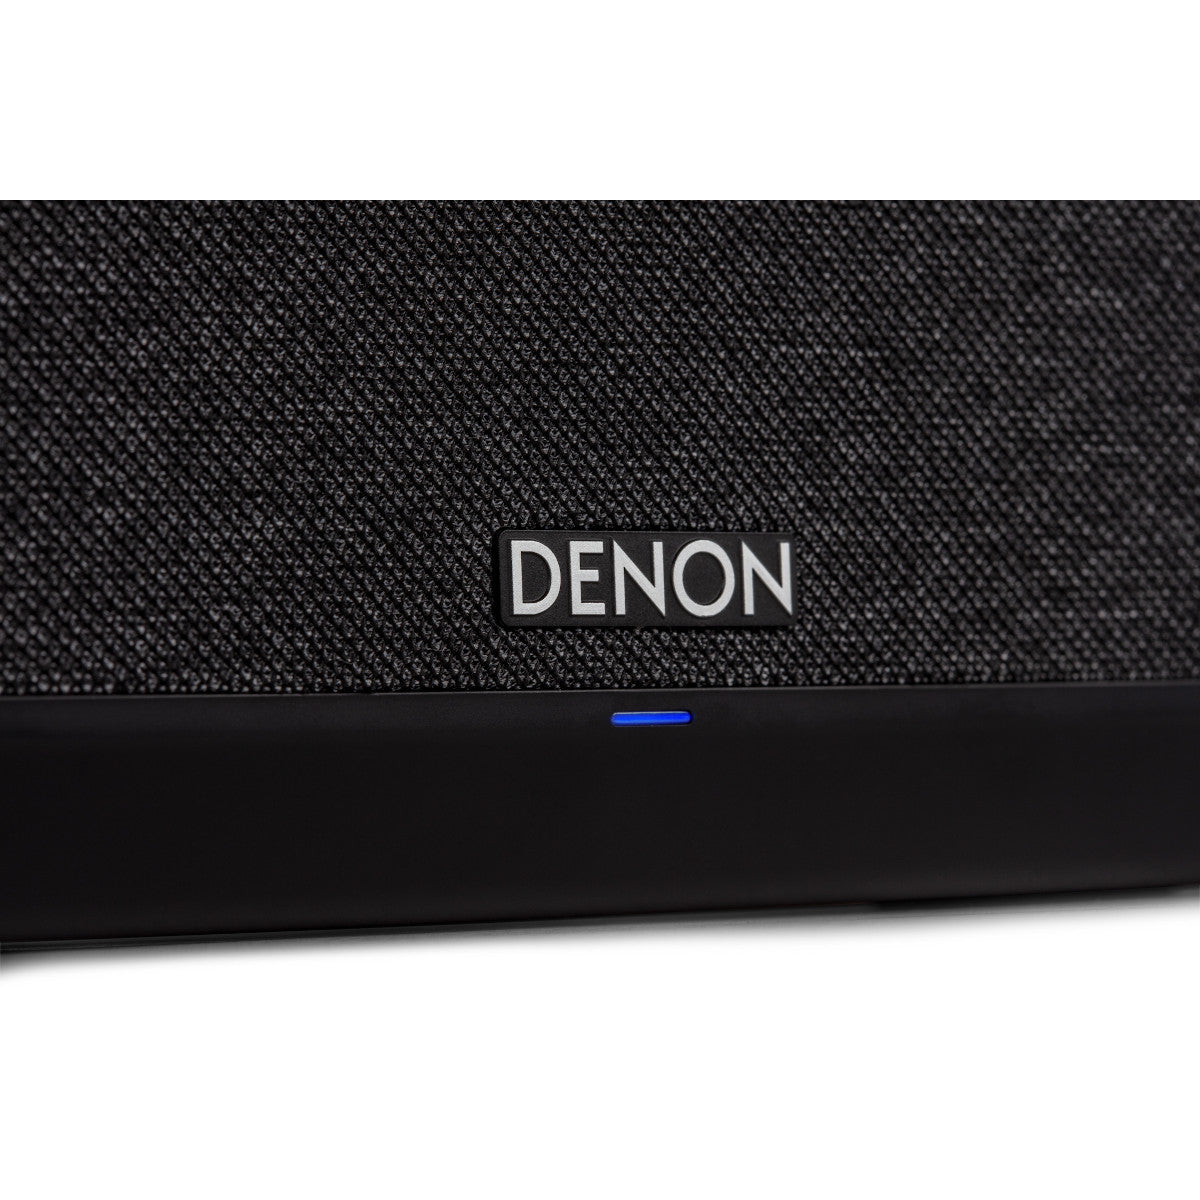 Denon AVR-X6700H 11.2-Channel 8K AV Receiver with 3D Audio and Amazon Alexa Voice Control with Denon Home 250 Wireless Streaming Speaker (Black)